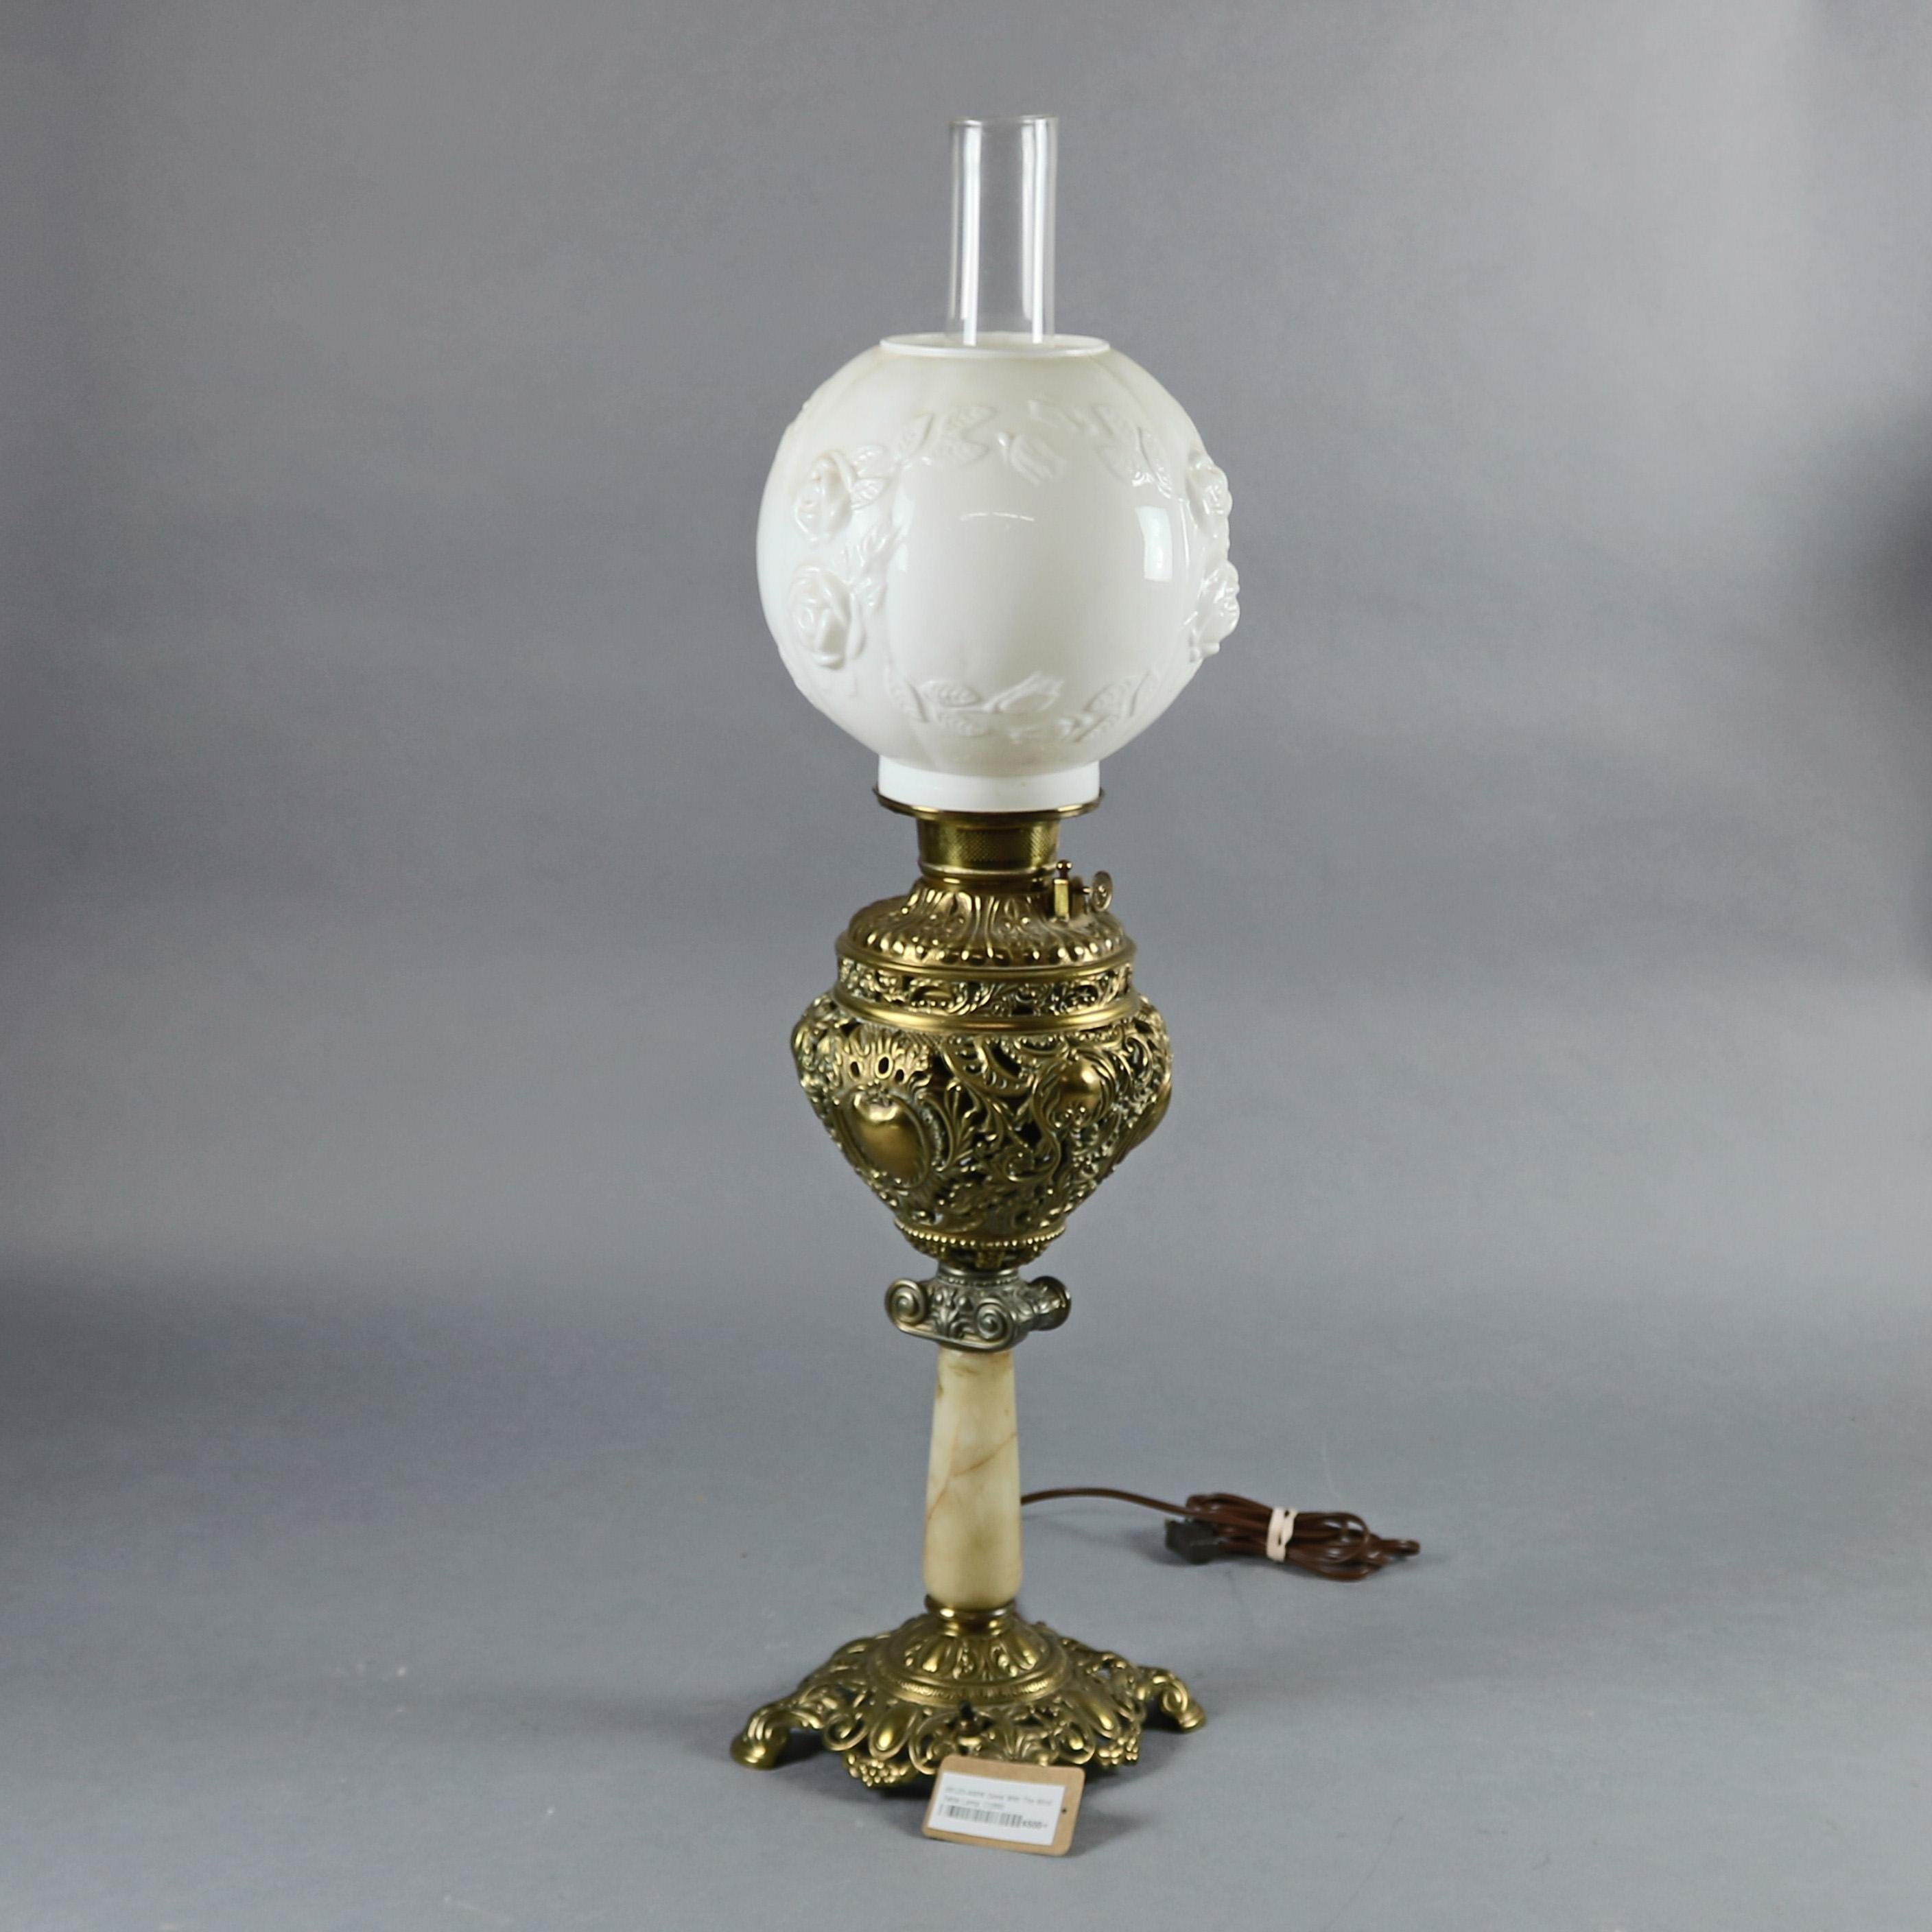 An antique Victorian Gone With The Wind parlor table lamp features base with pierced foliate and scroll brass font and base having marble column and blown out floral shade, electrified and working, c1880

Measures - 31.5